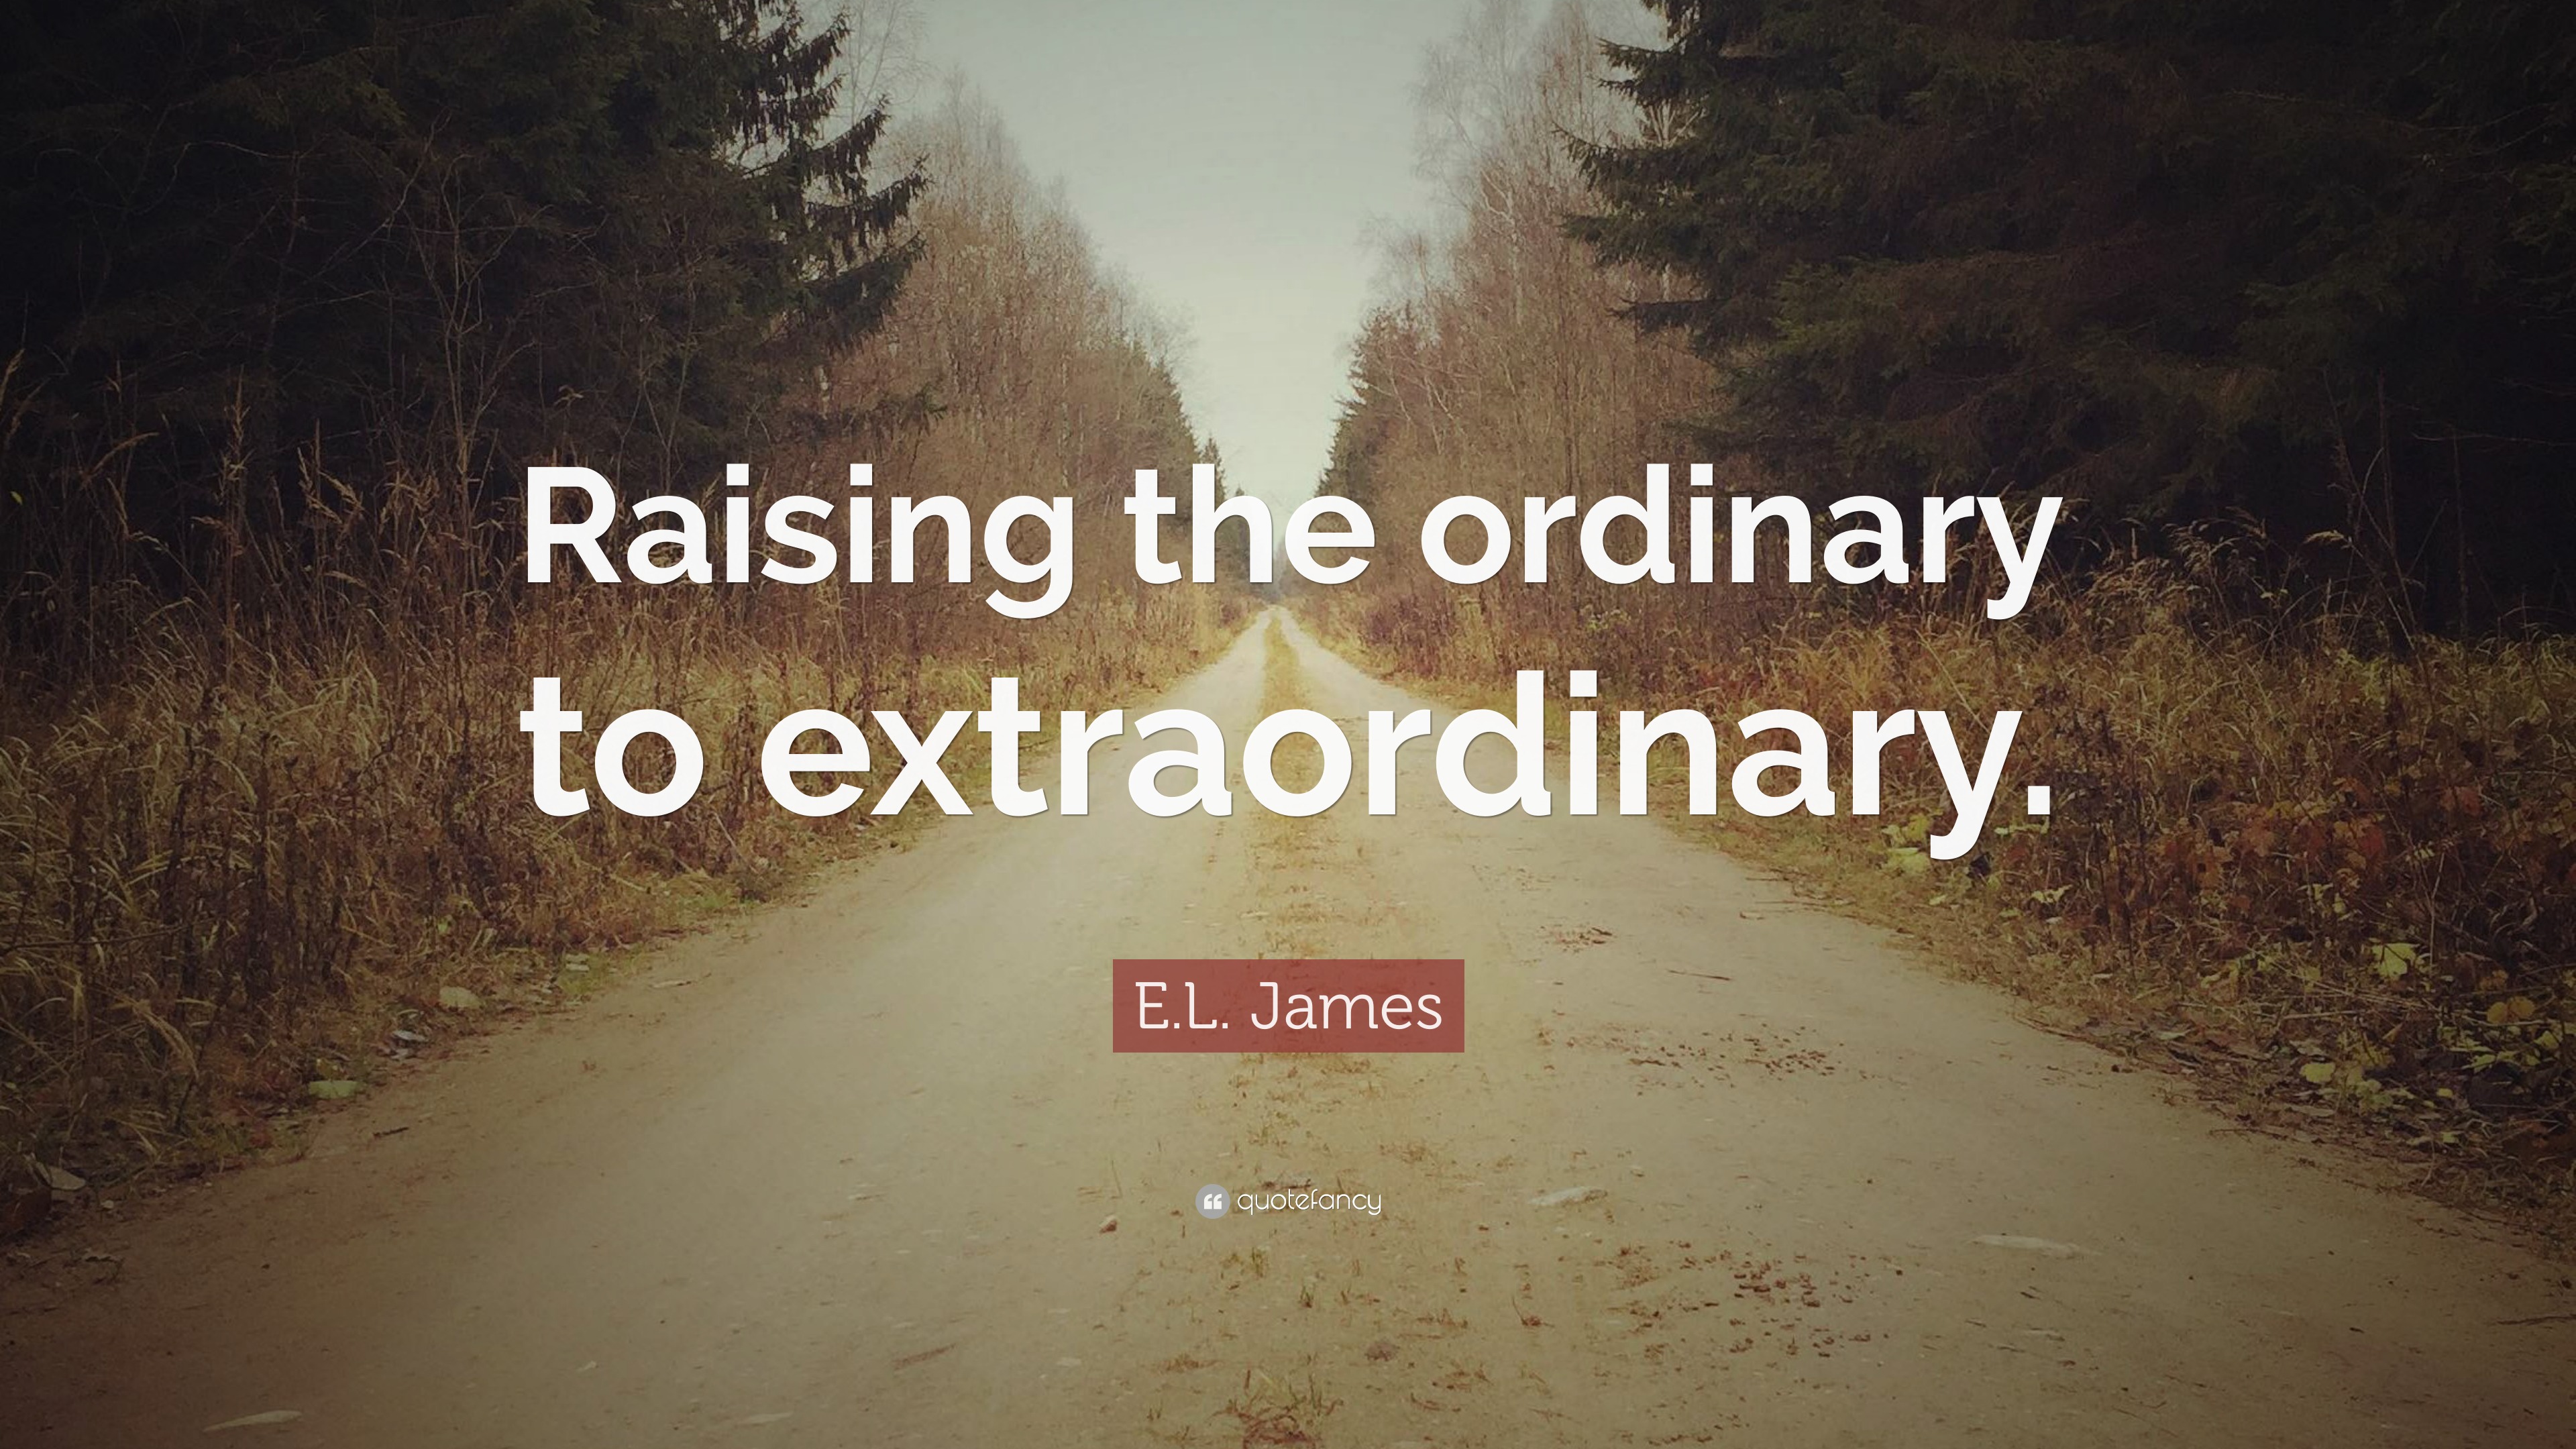 Ordinary Quote : Famous quotes about 'Extraordinary Things